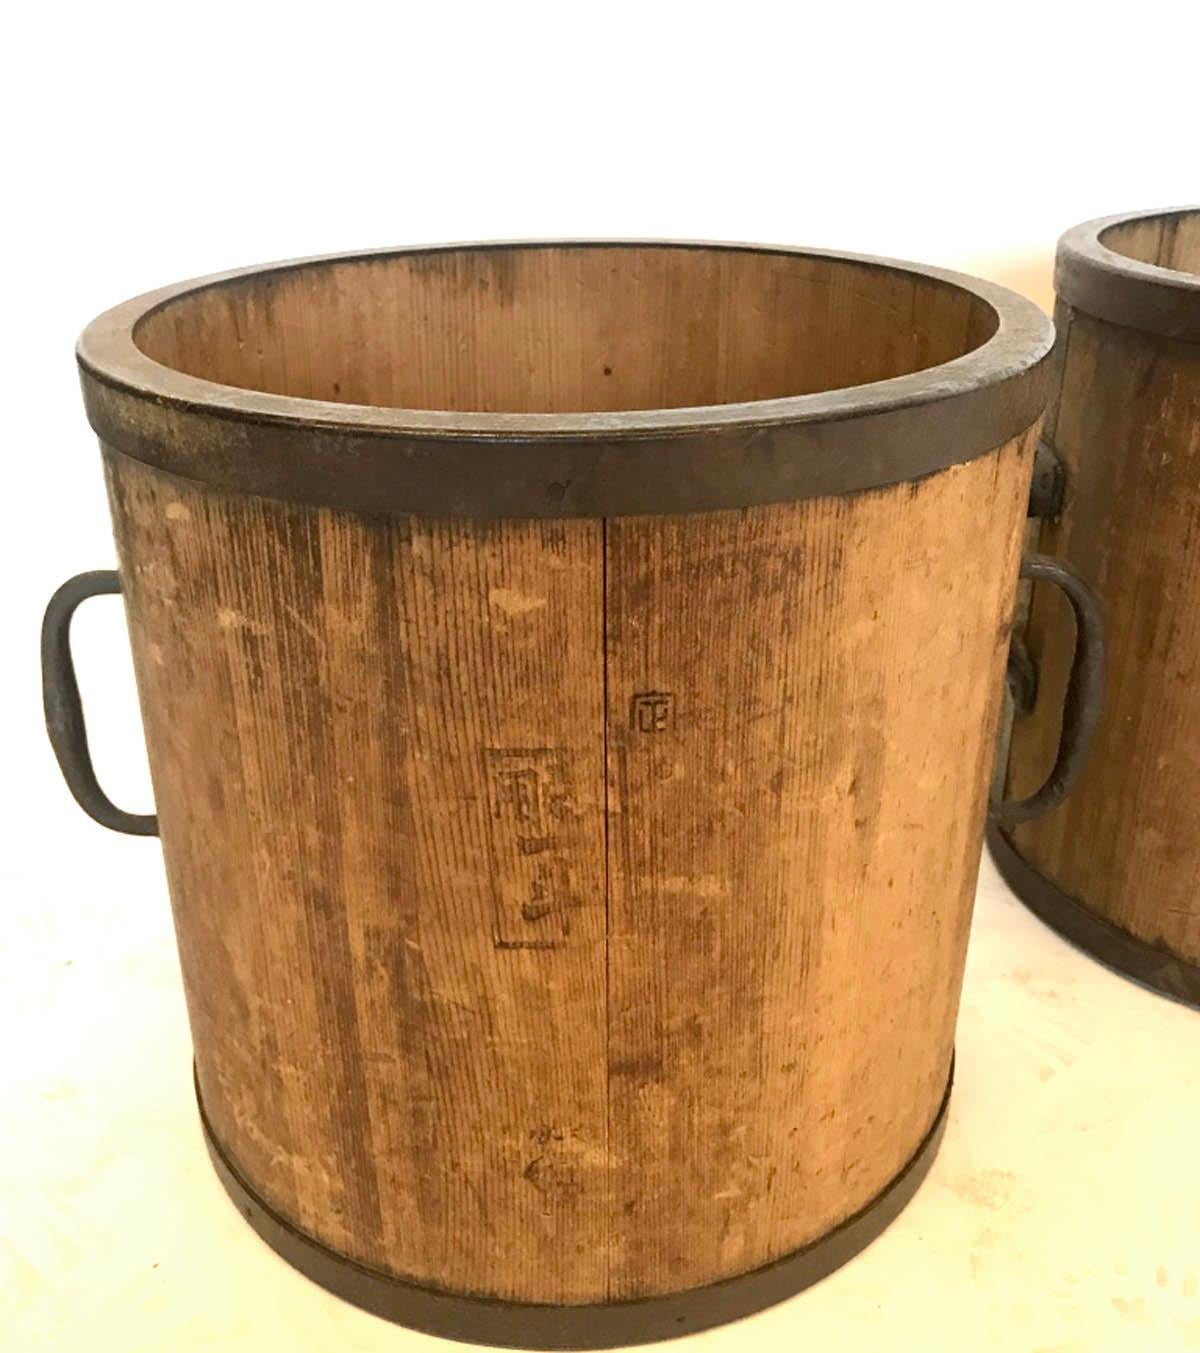 19th century wooden buckets rimmed in iron which contained rice. Beautiful patina. Functional, great as planters.